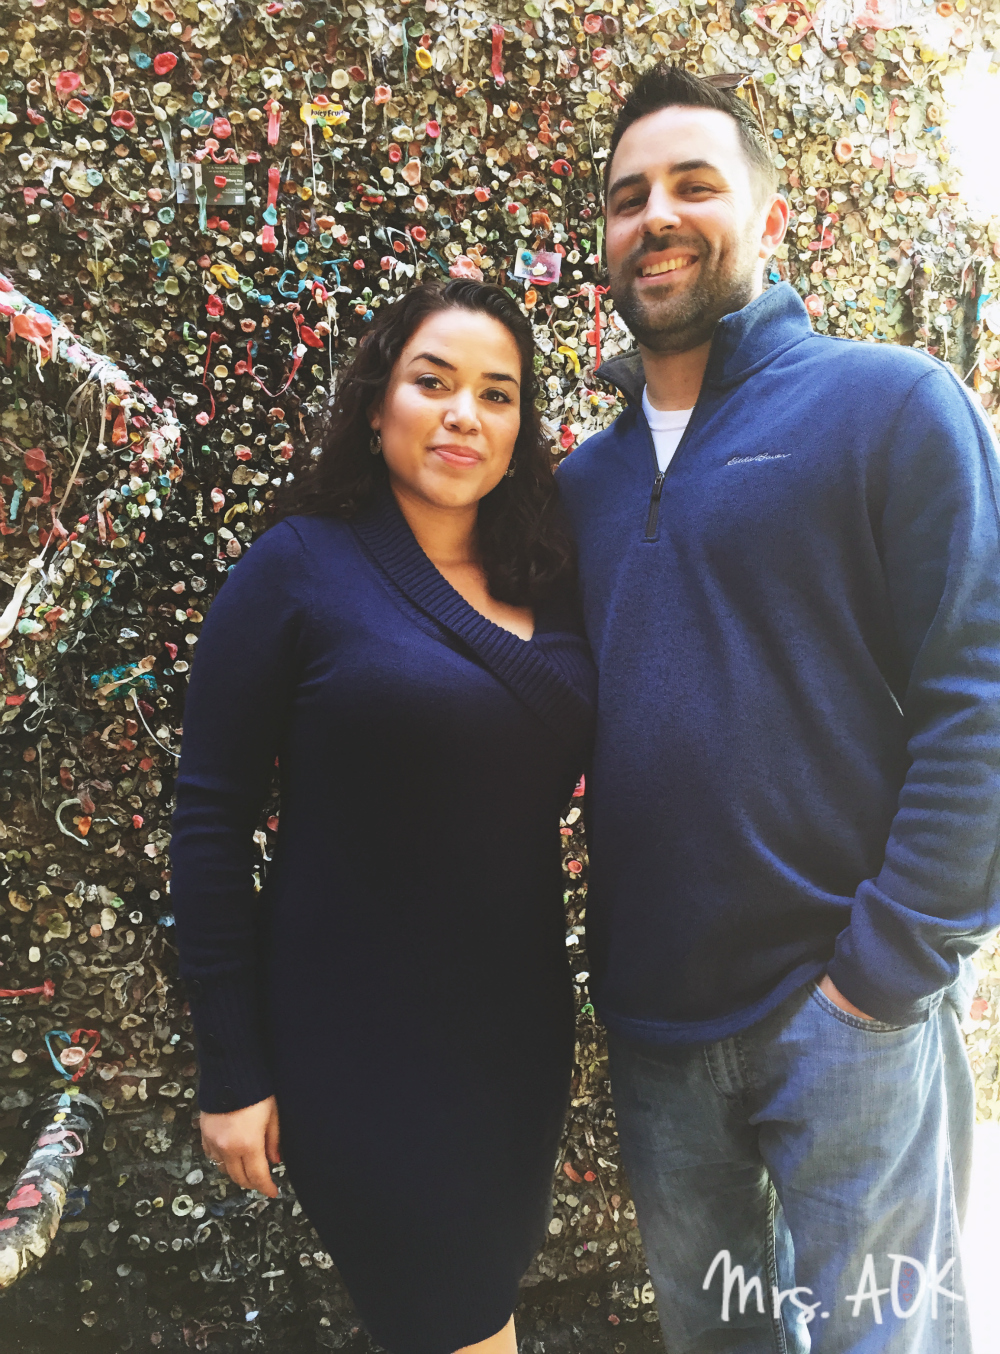 Thank You Notes|The Great Gum Wall of Seattle Me and My Babe| Mrs. AOK, A Work In Progress